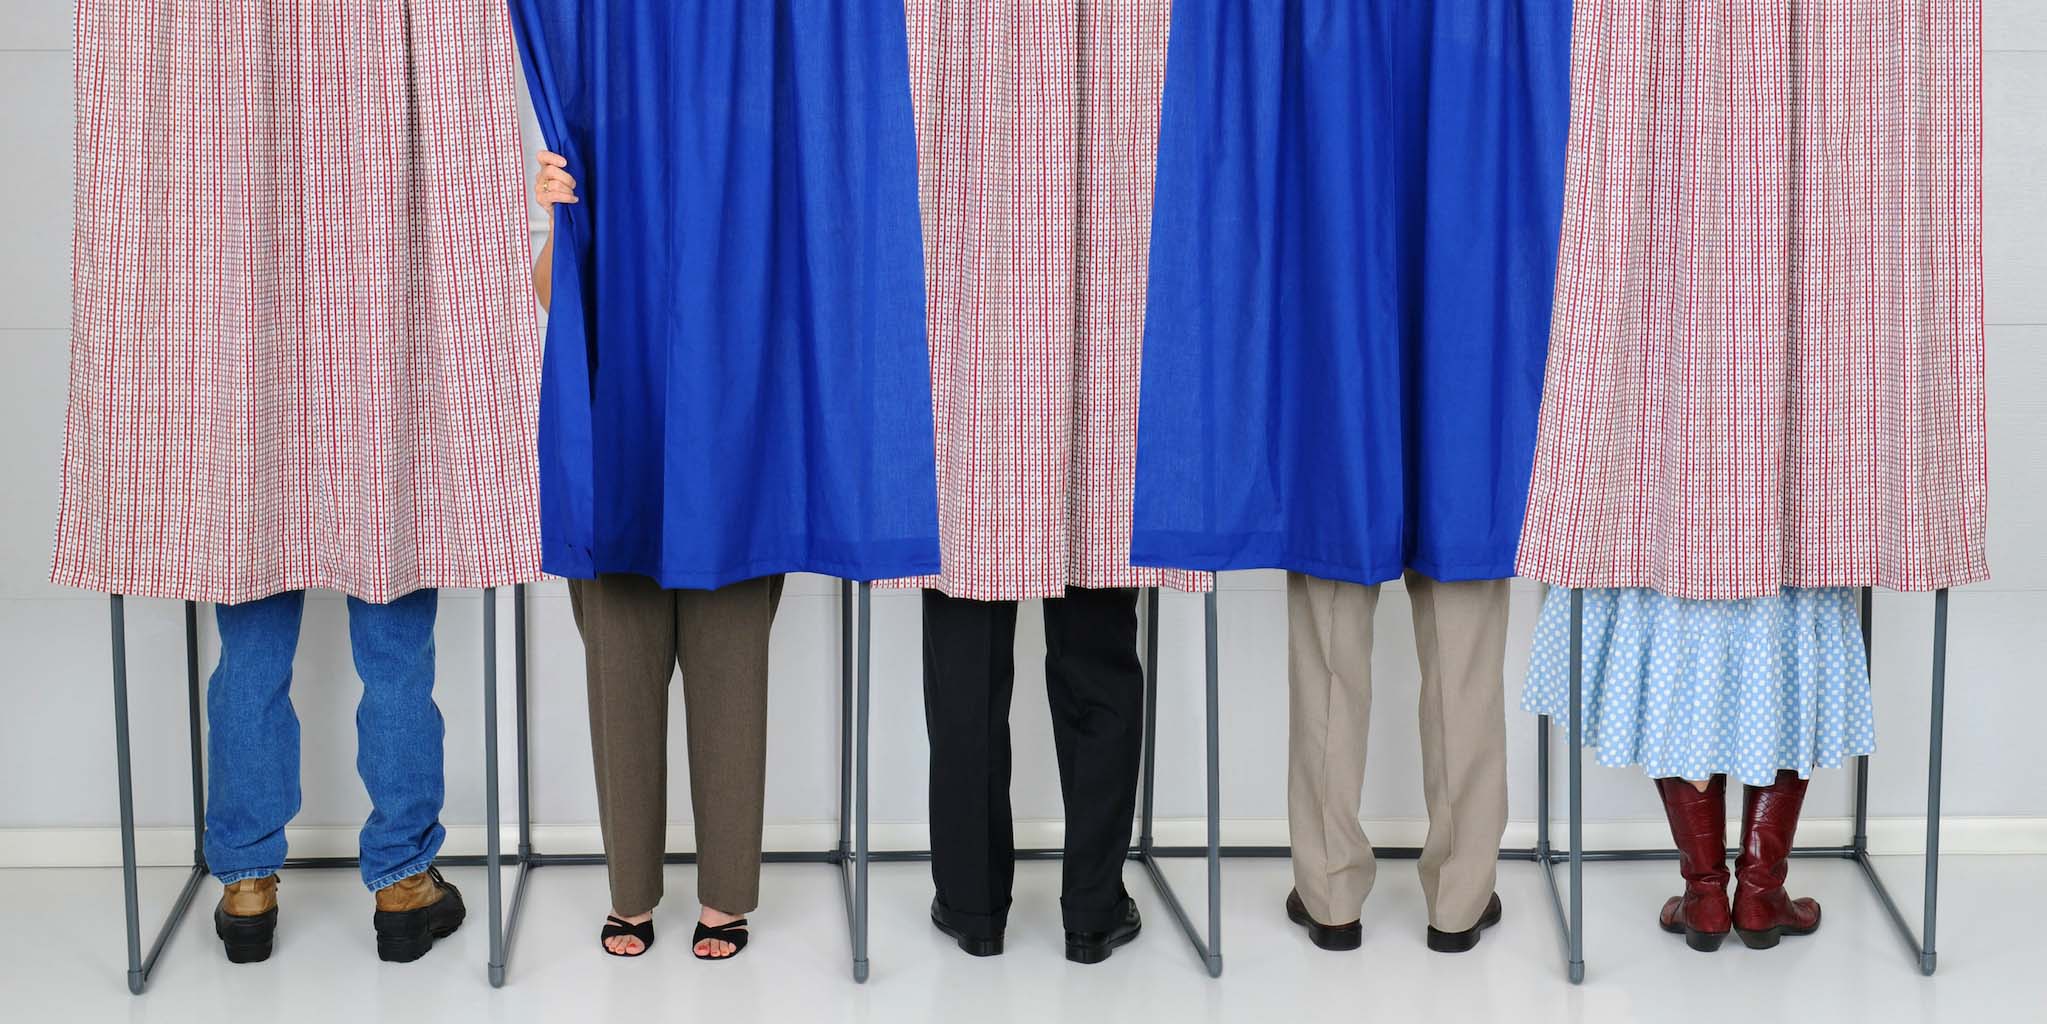 People using voting booths with curtains.